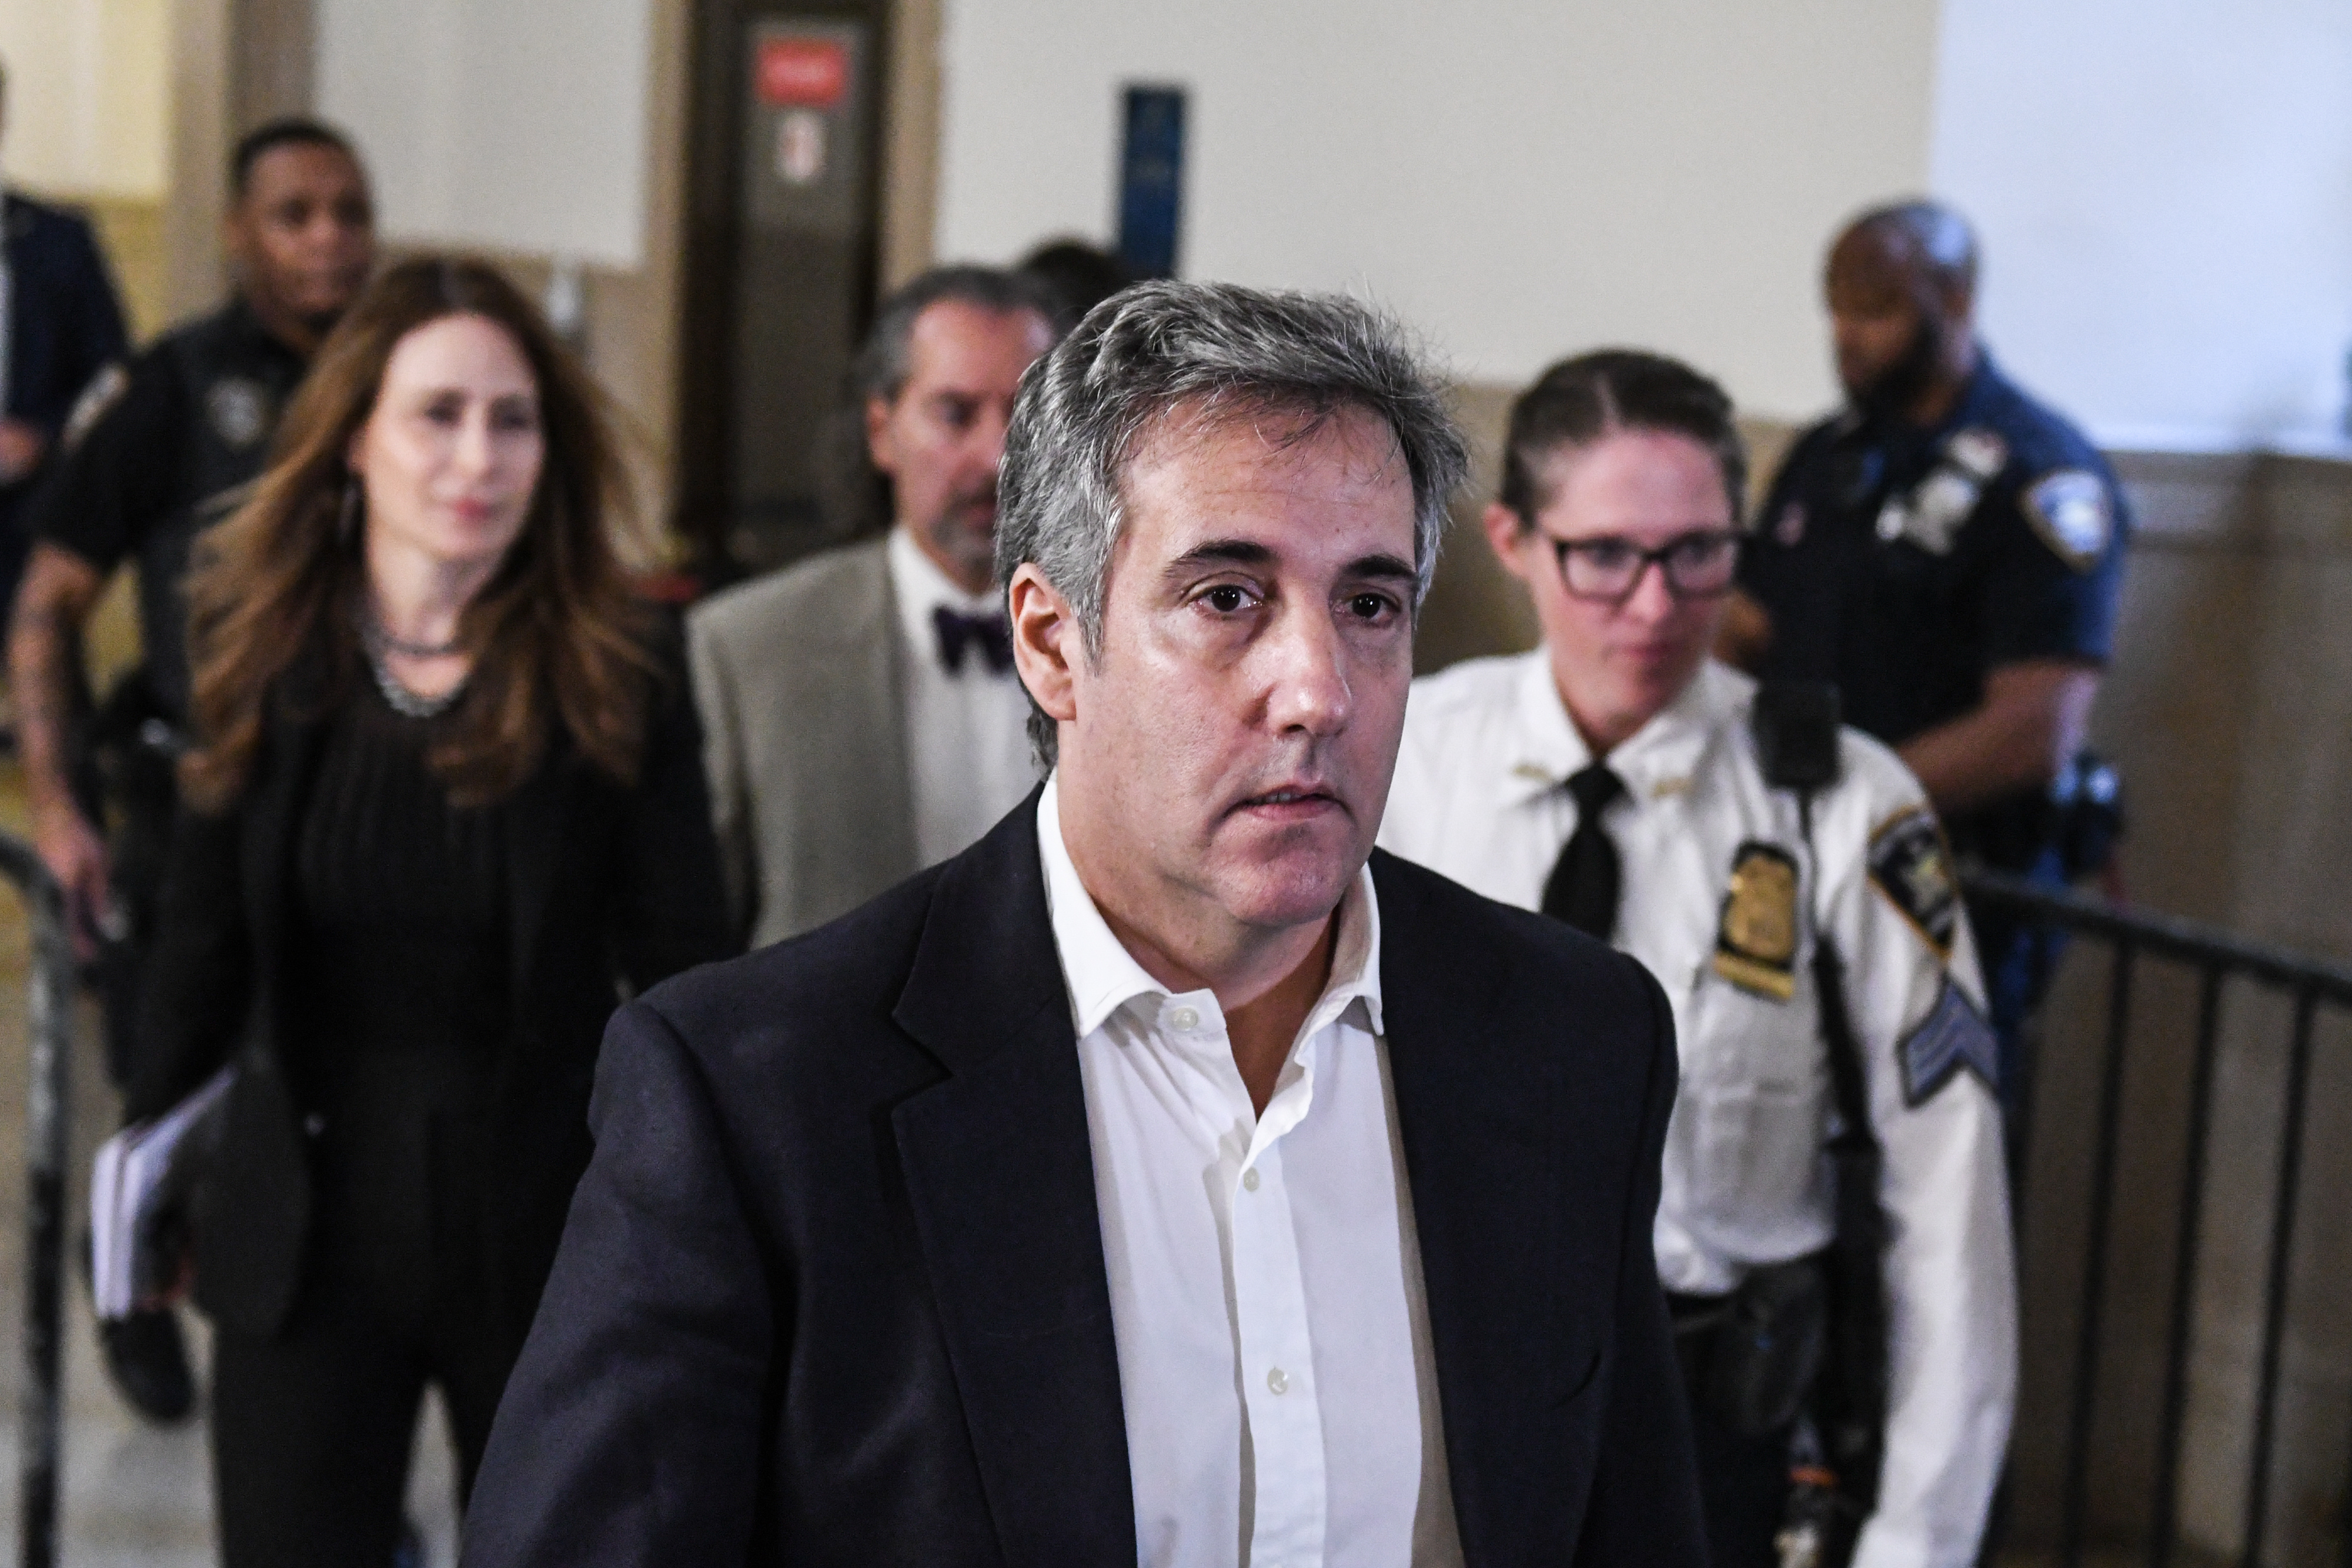 Before Michael Cohen's testimony, take a look back at he and Trump's
long and tortured history